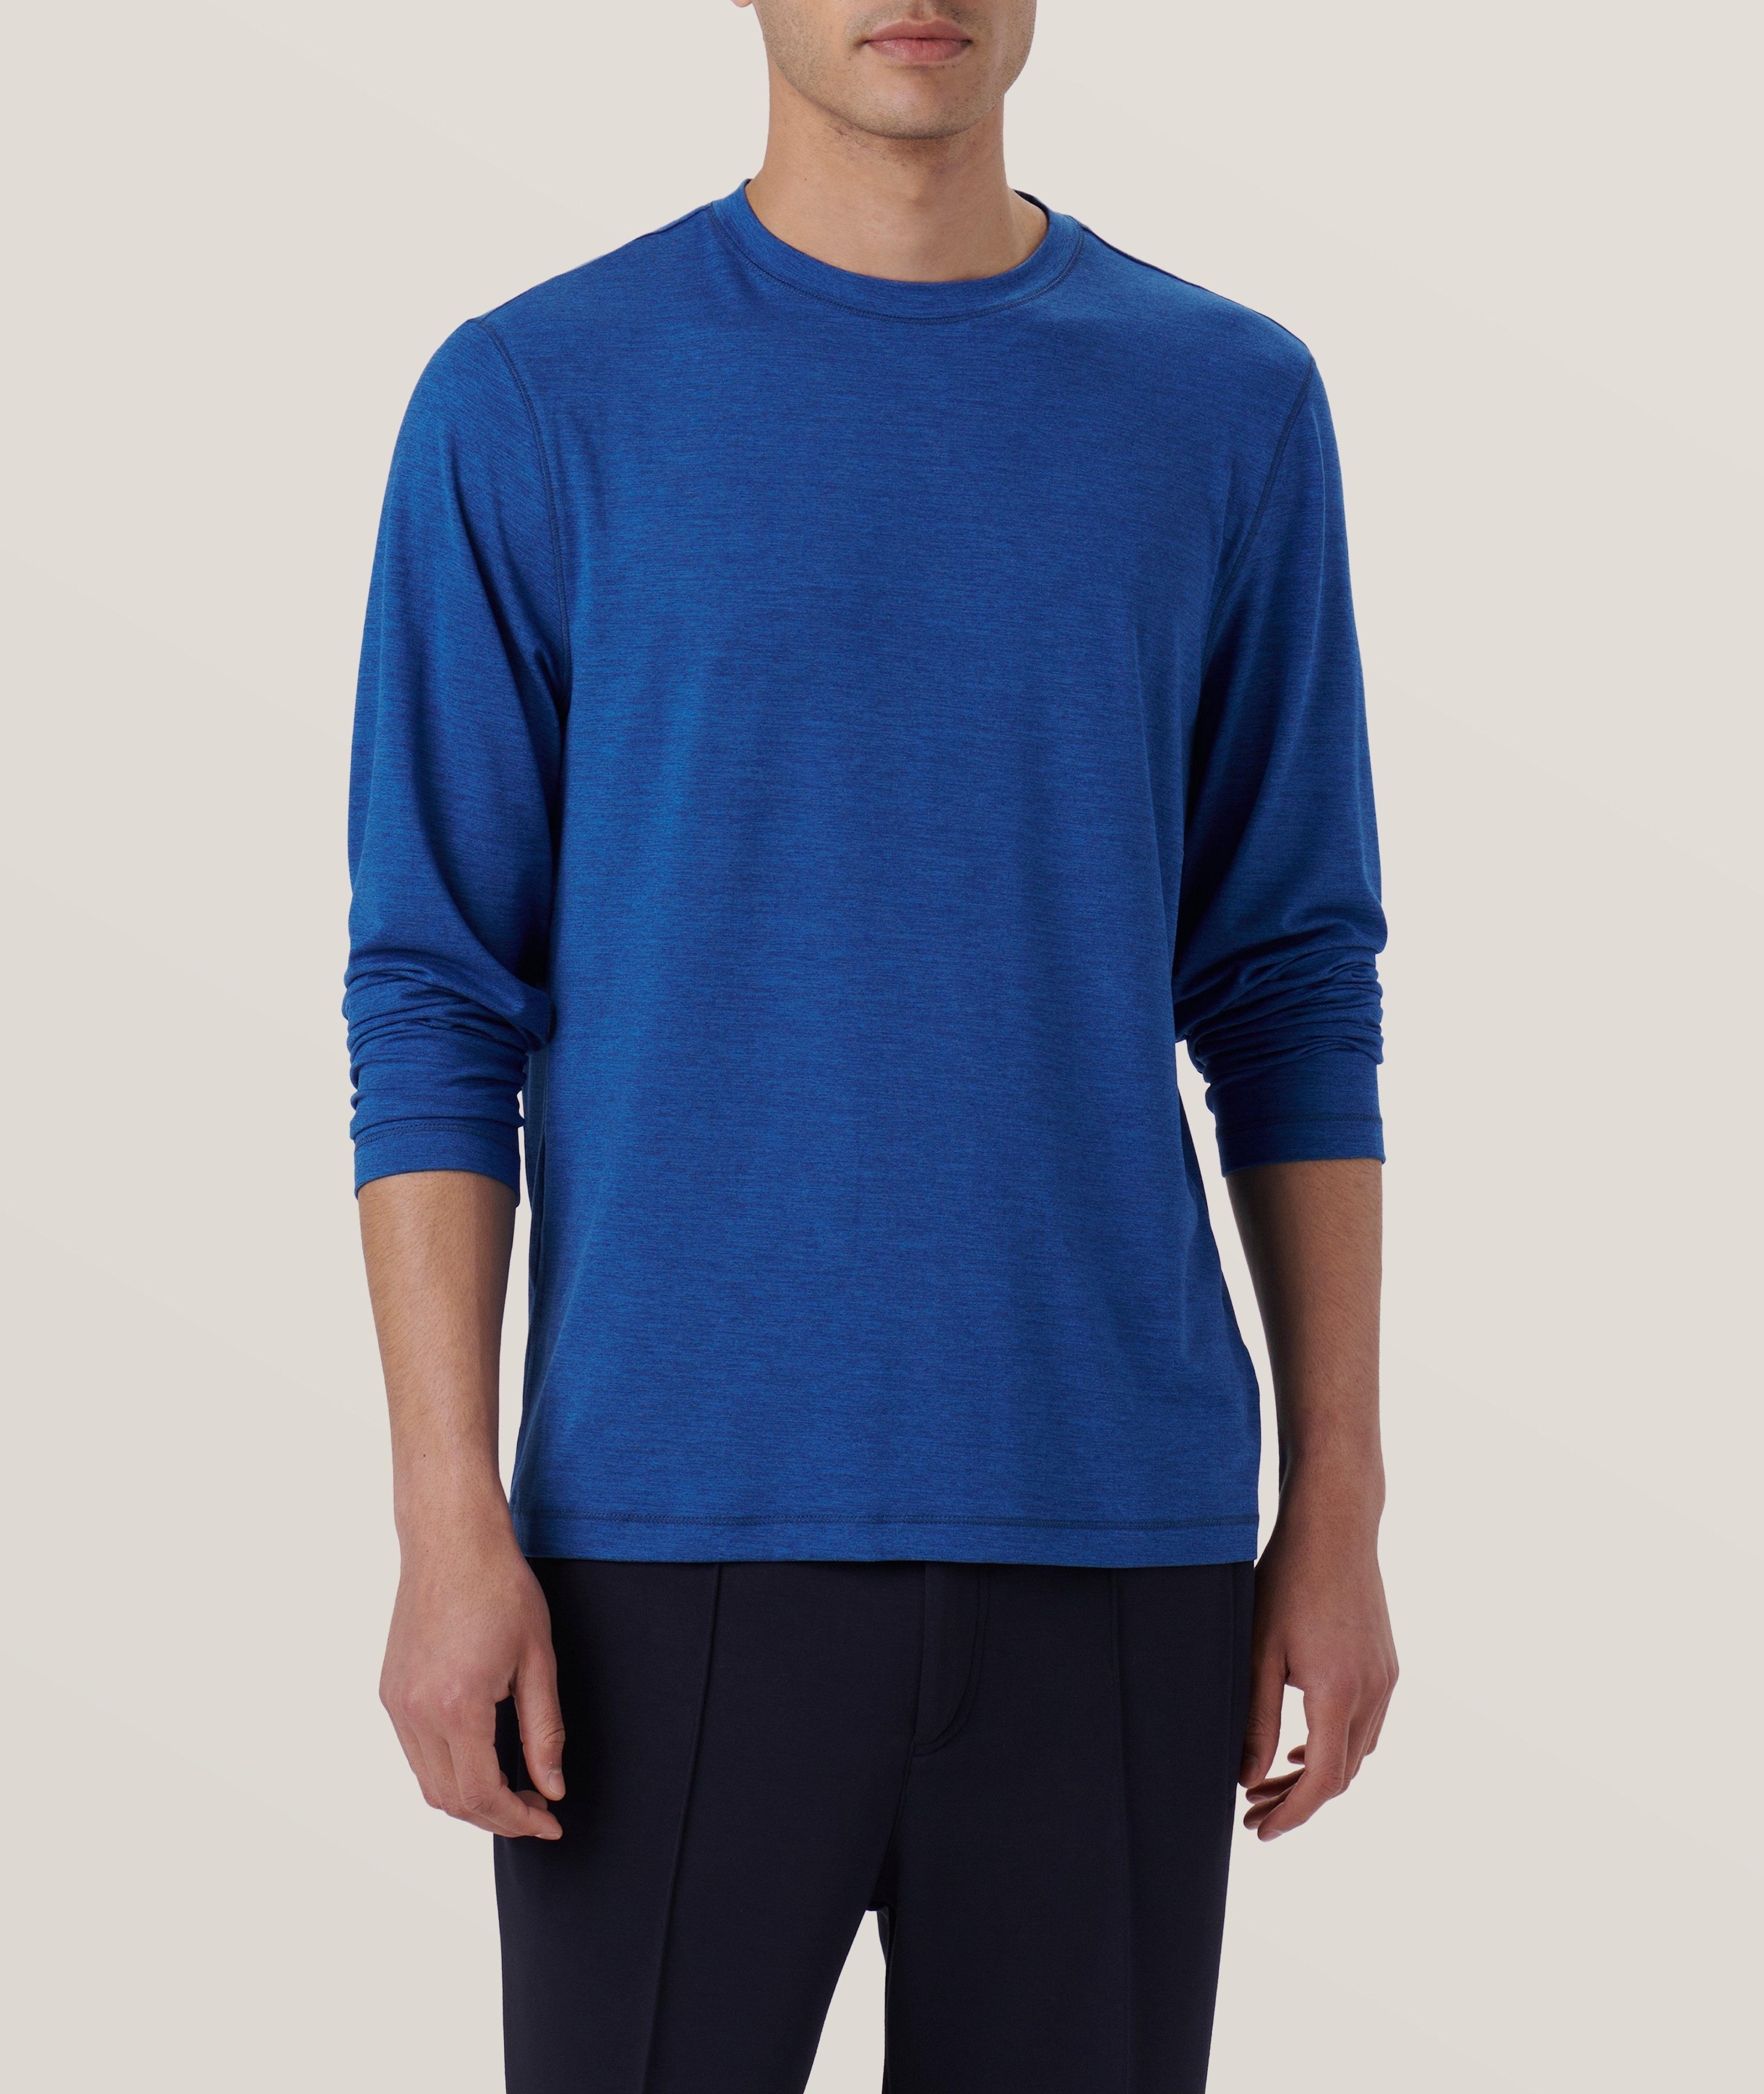 4-Way Stretch UV50 Performance Pullover image 2